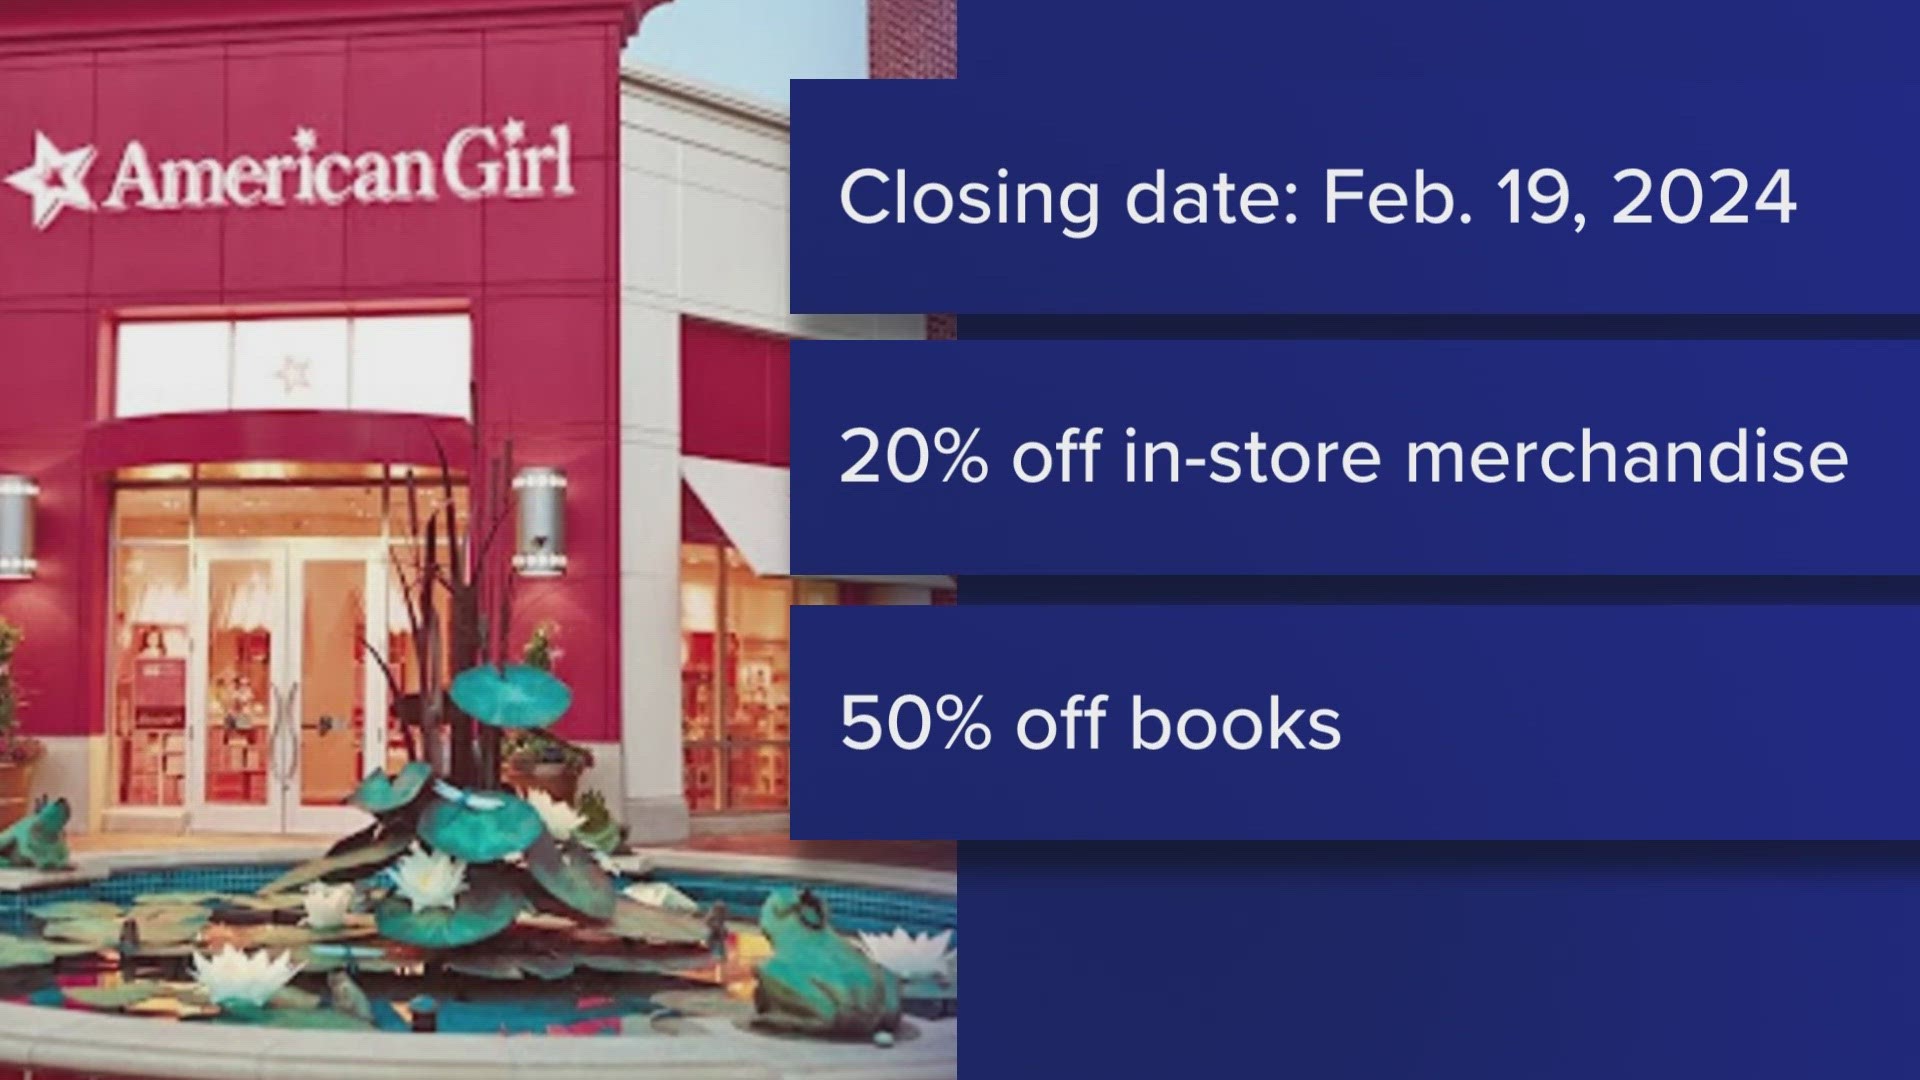 The official closing date is Feb. 19, and as a departure gift, the store will be offering 20% off storewide and 50% off on books.